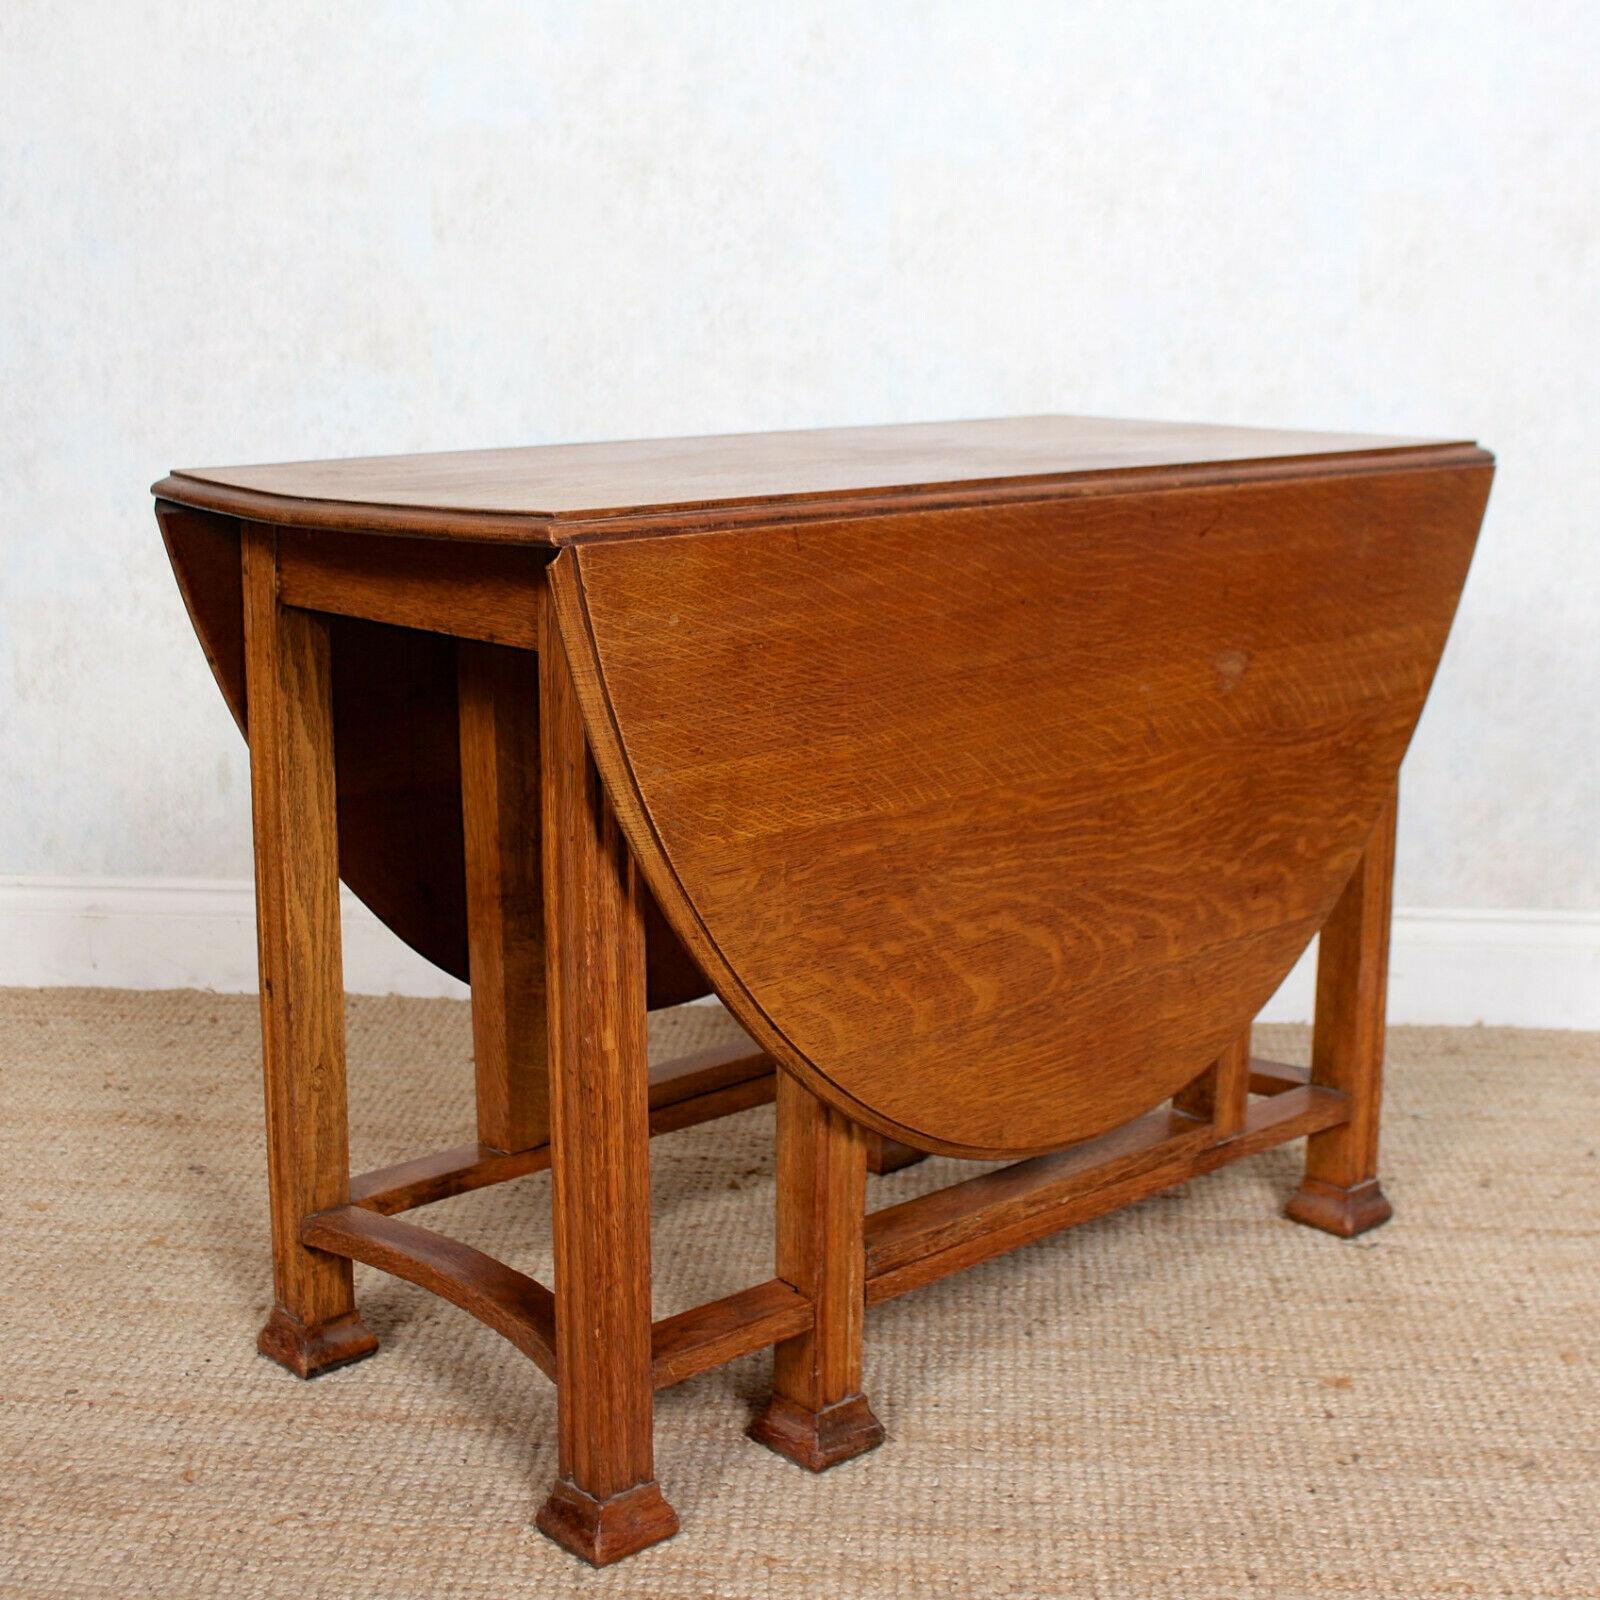 20th Century English Oak Gateleg Dining Table Carved Solid Folding Kitchen Table For Sale